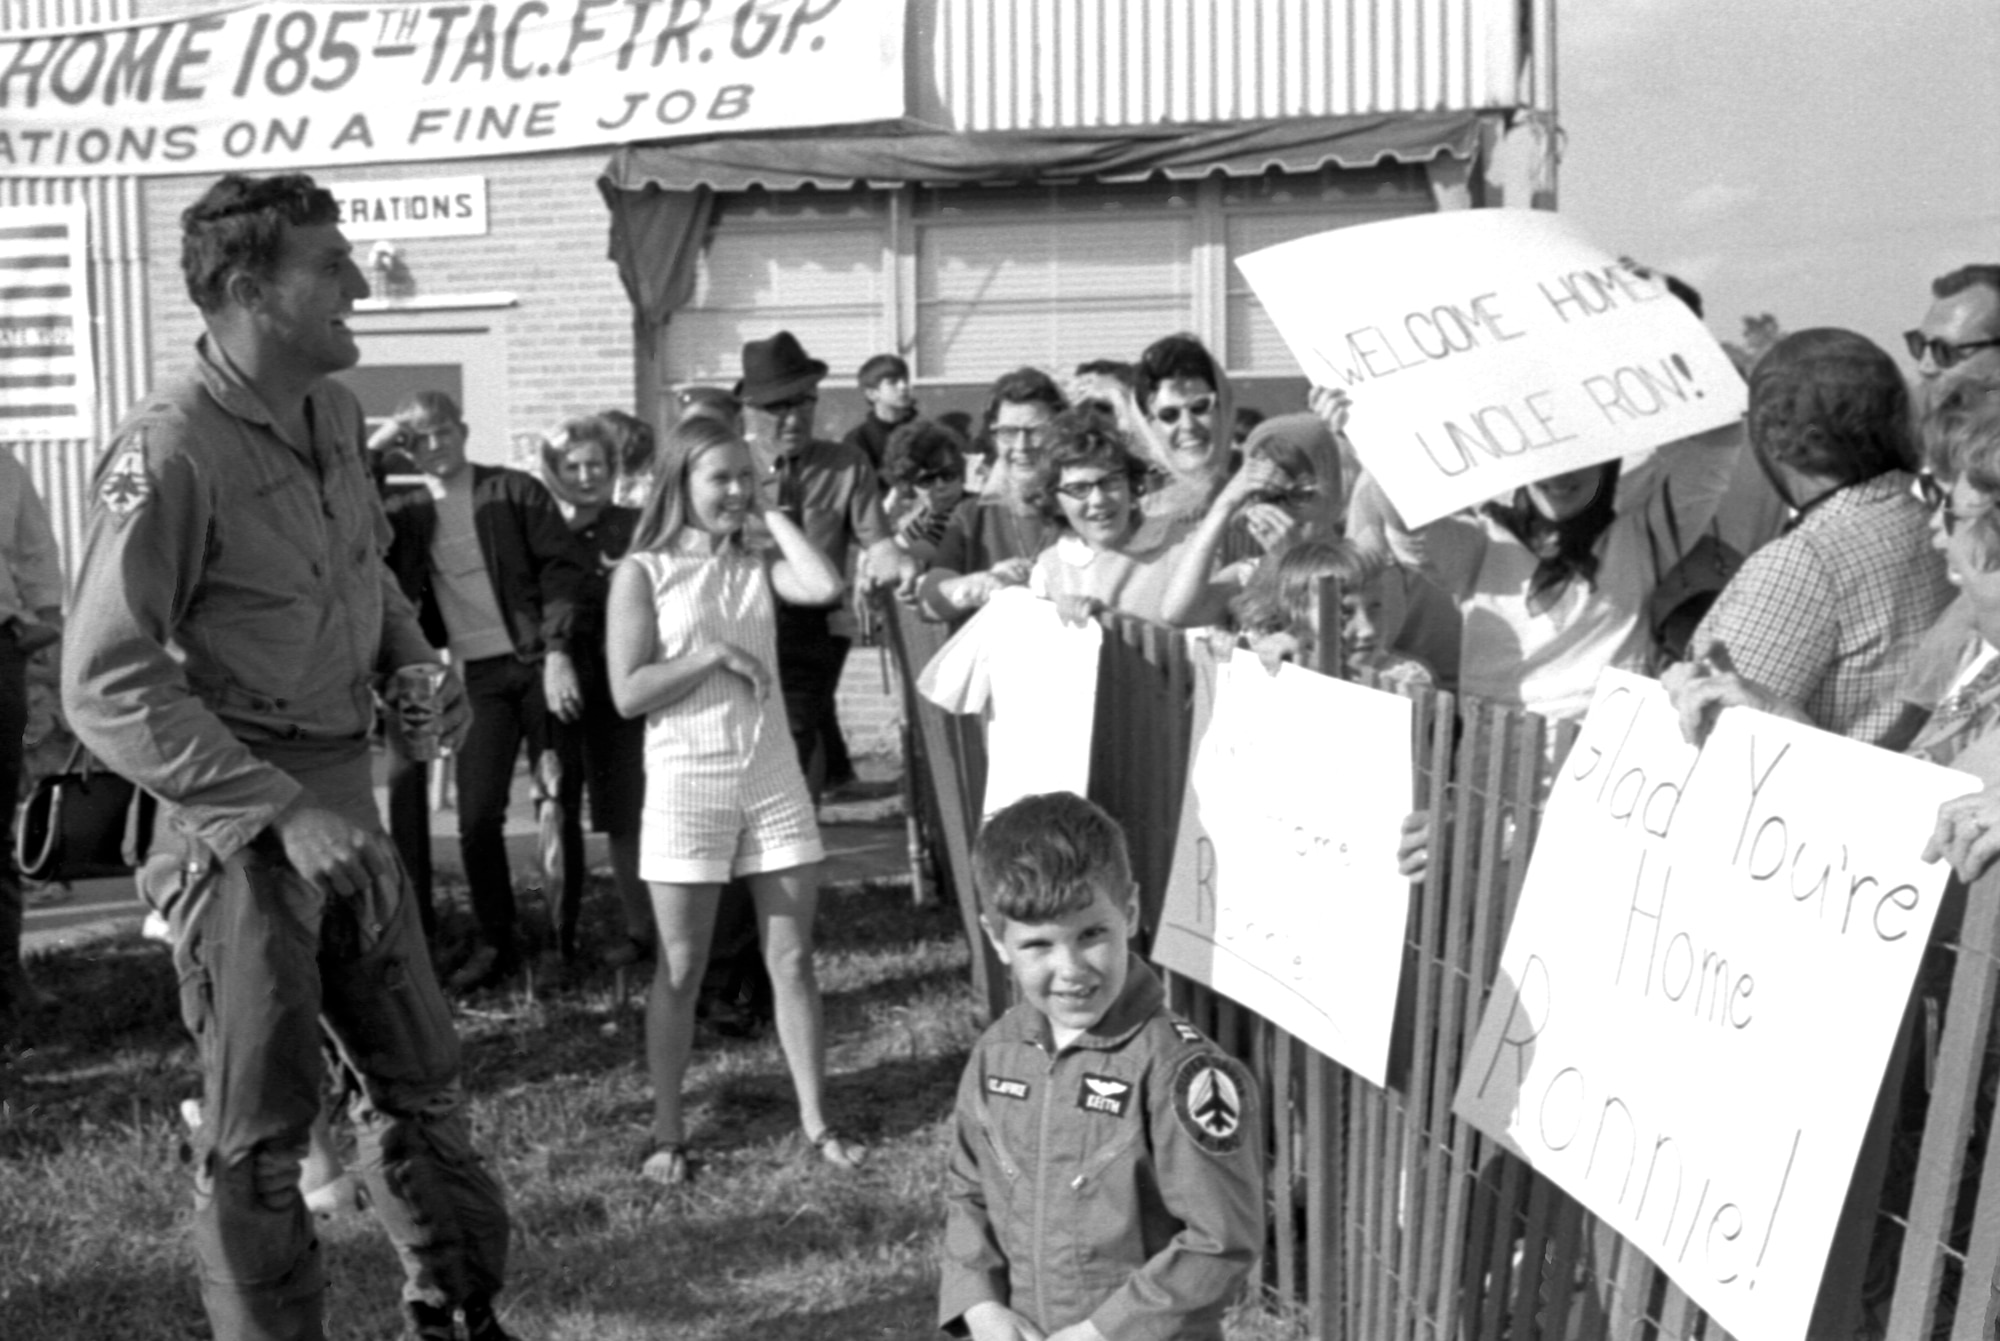 An Iowa Air National Guard, F-100 fighter pilot with the 185th Tactical Fighter Group is greeted by family and friends in Sioux City, Iowa on May 14, 1969, after returning home from a yearlong activation at Phu Cat Airbase in South Vietnam. (U.S. Air National Guard photo/released 185th TFG Photo)